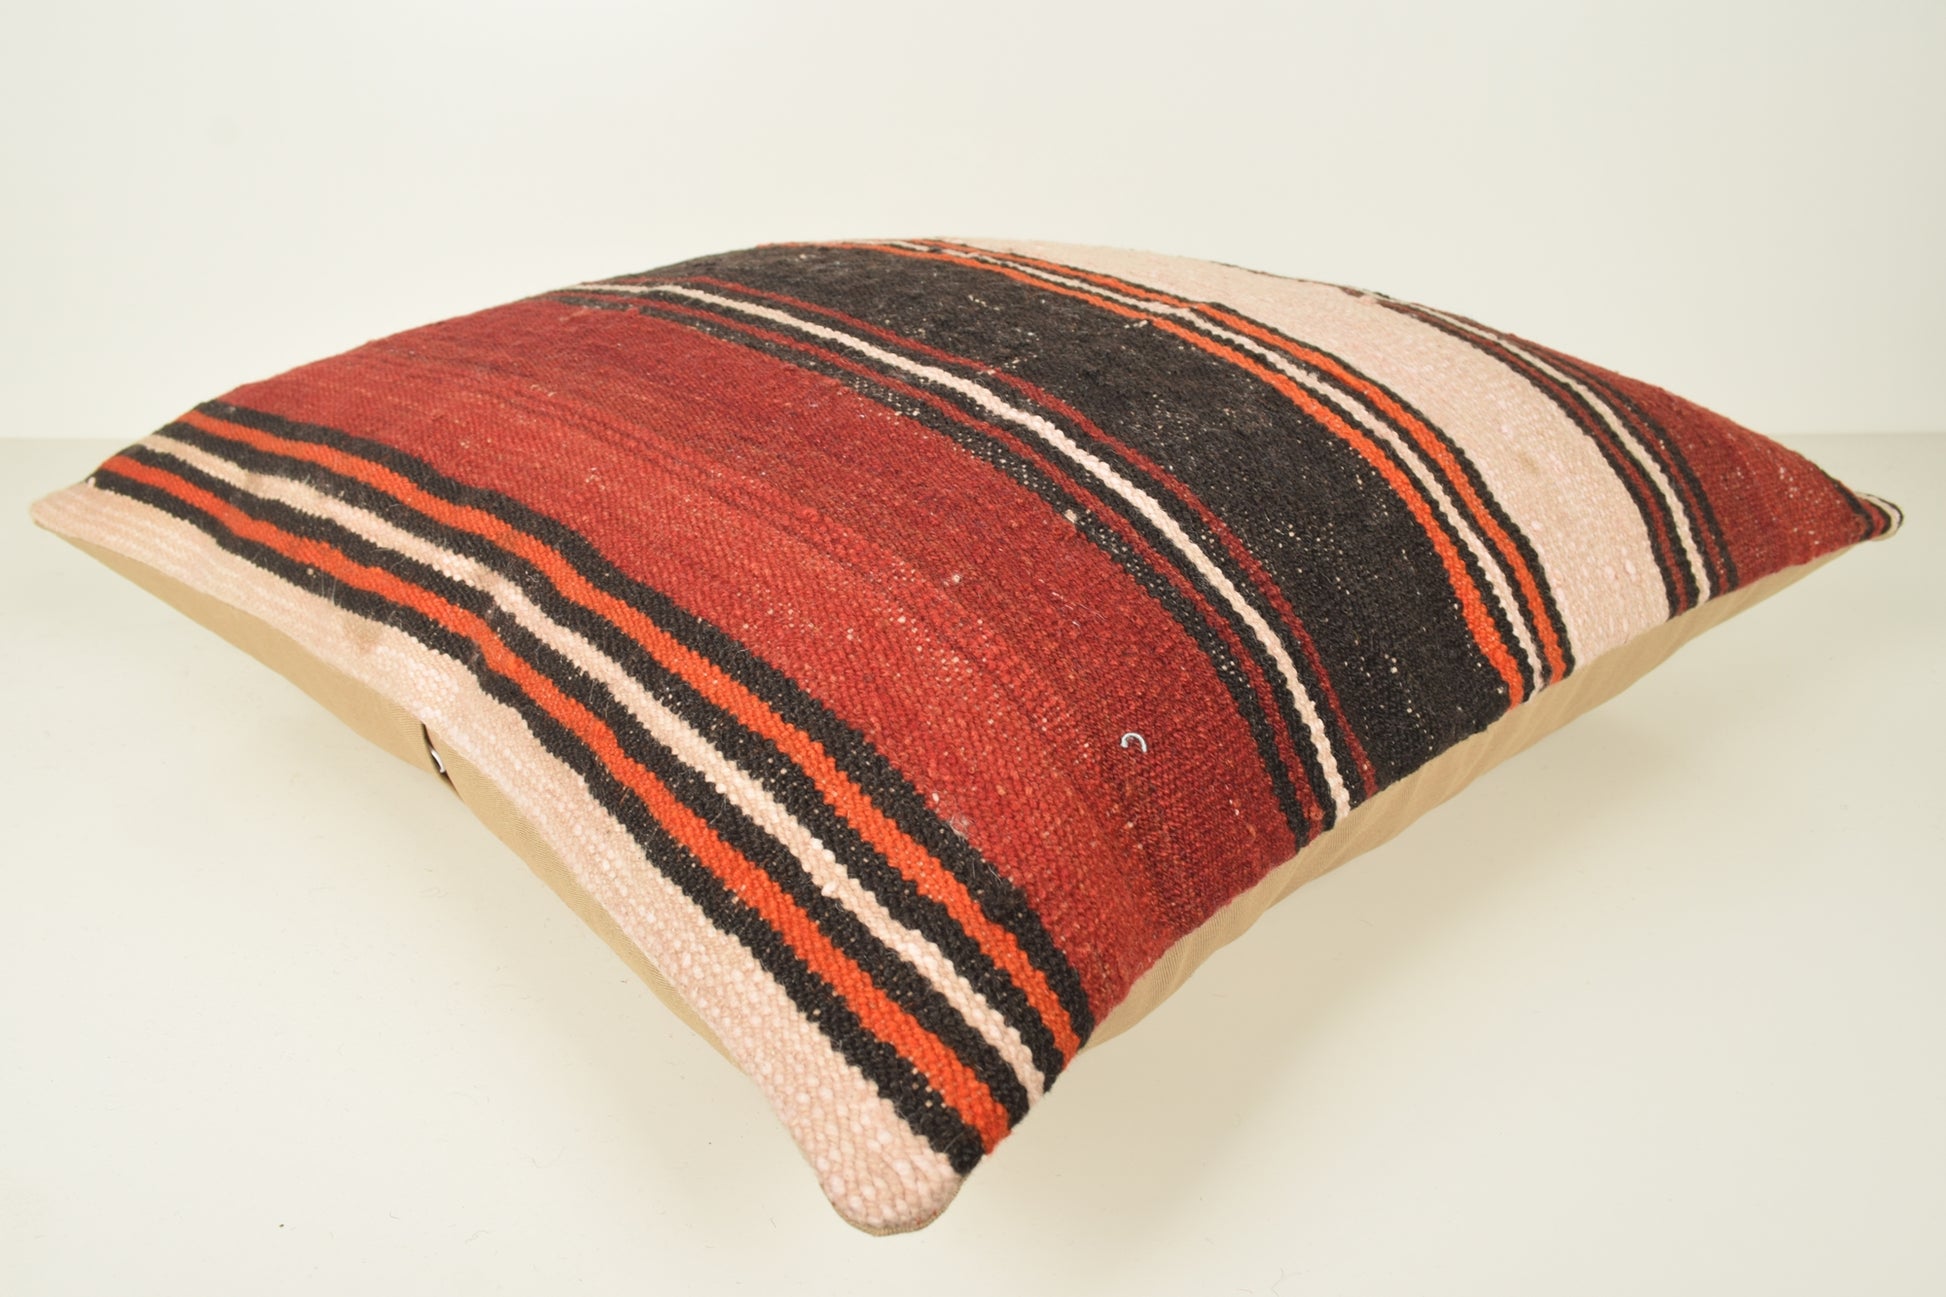 Kilim Pillow Urban Outfitters A00990 24x24 Craft Northern Low-priced